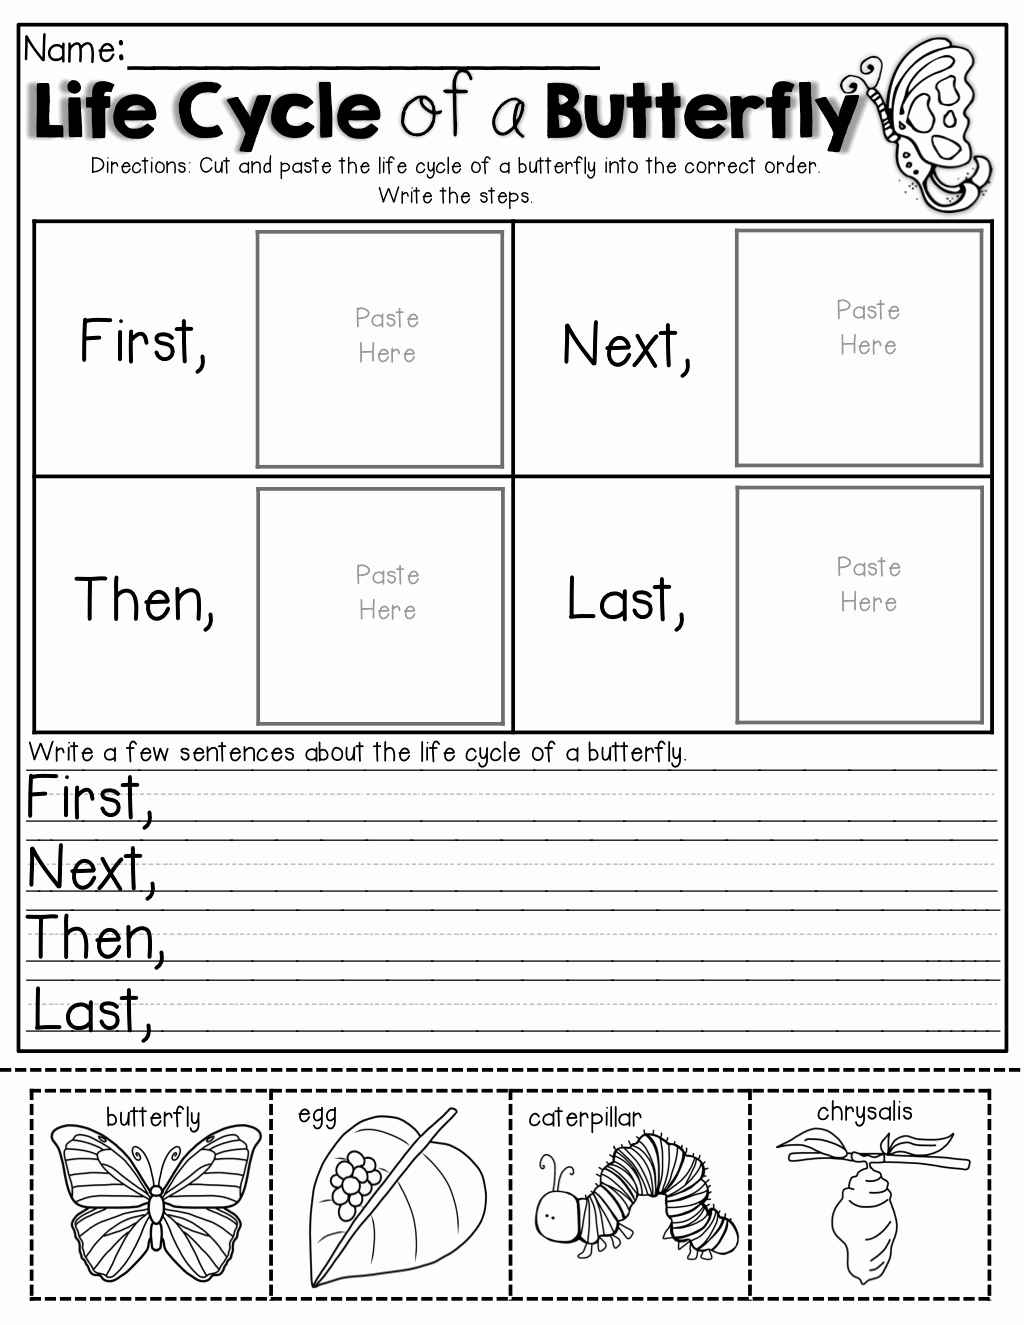 Butterfly Life Cycle Worksheet Awesome Life Cycle Of A butterfly Cut Paste and Write